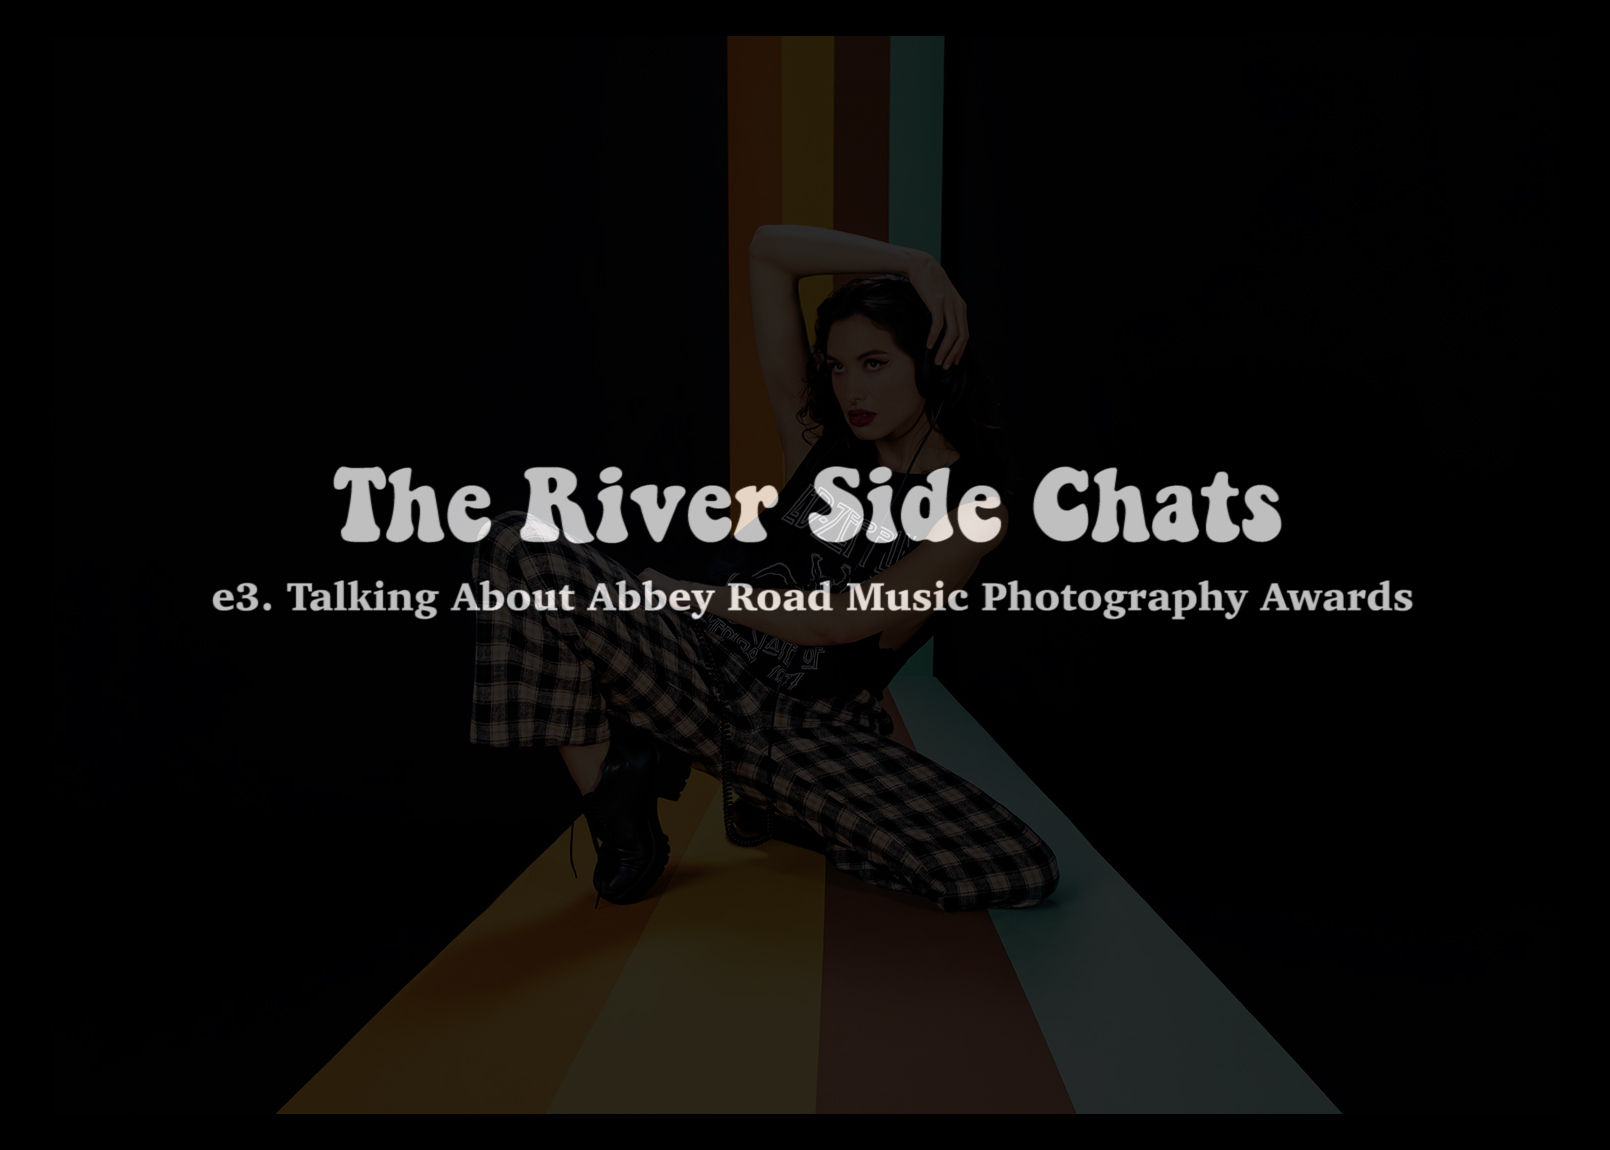  The River Side Chats - E3. Talking About Abbey Road Studios MPA 2022 - Jada And David Parrish